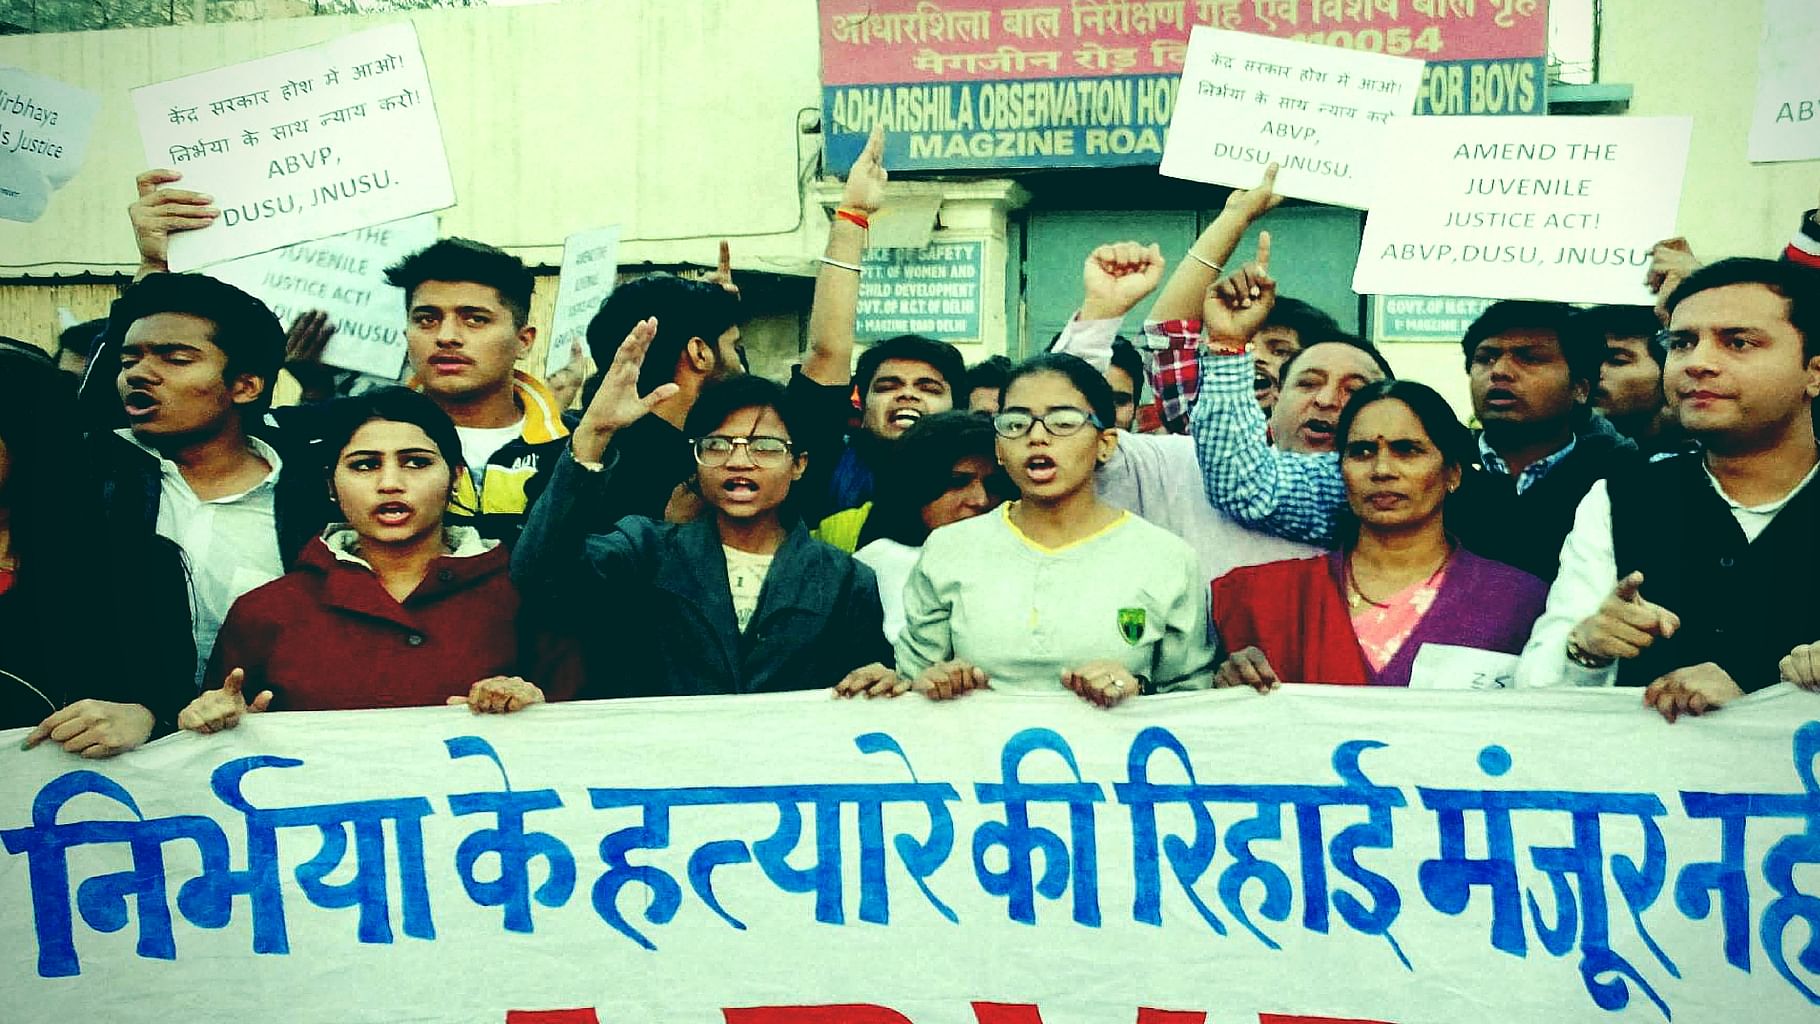 Activists along with Nirbhaya’s mother (second from left) staging a protest against the release of juvenile delinquent in the Nirbhaya case, in New Delhi on Saturday. (Photo: PTI/Altered by The Quint)